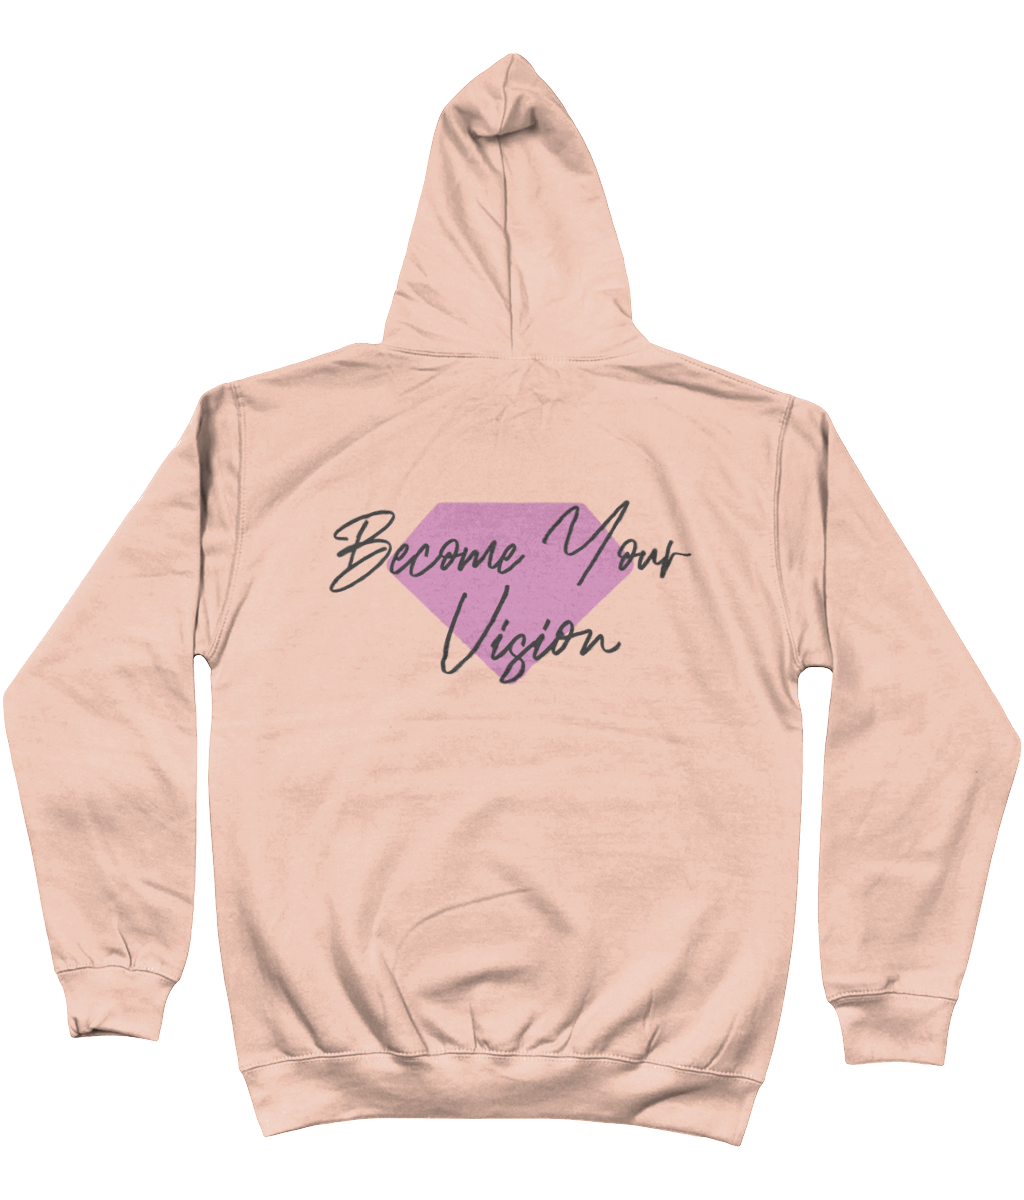 BECOME YOUR VISION HOODIE